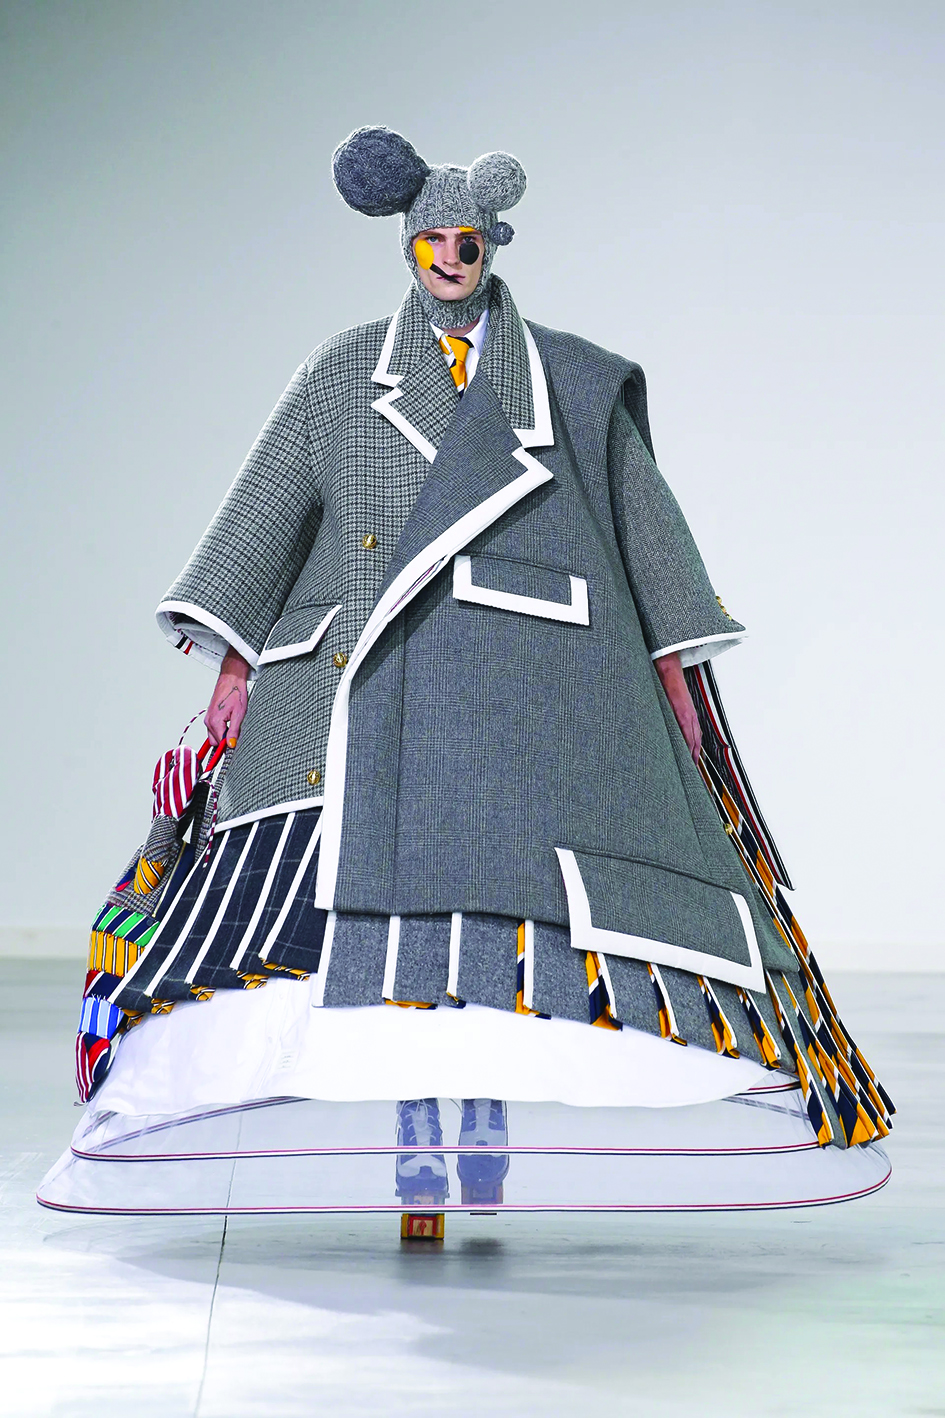 Thom Browne brings the drama to classic tailoring for Fall 2022